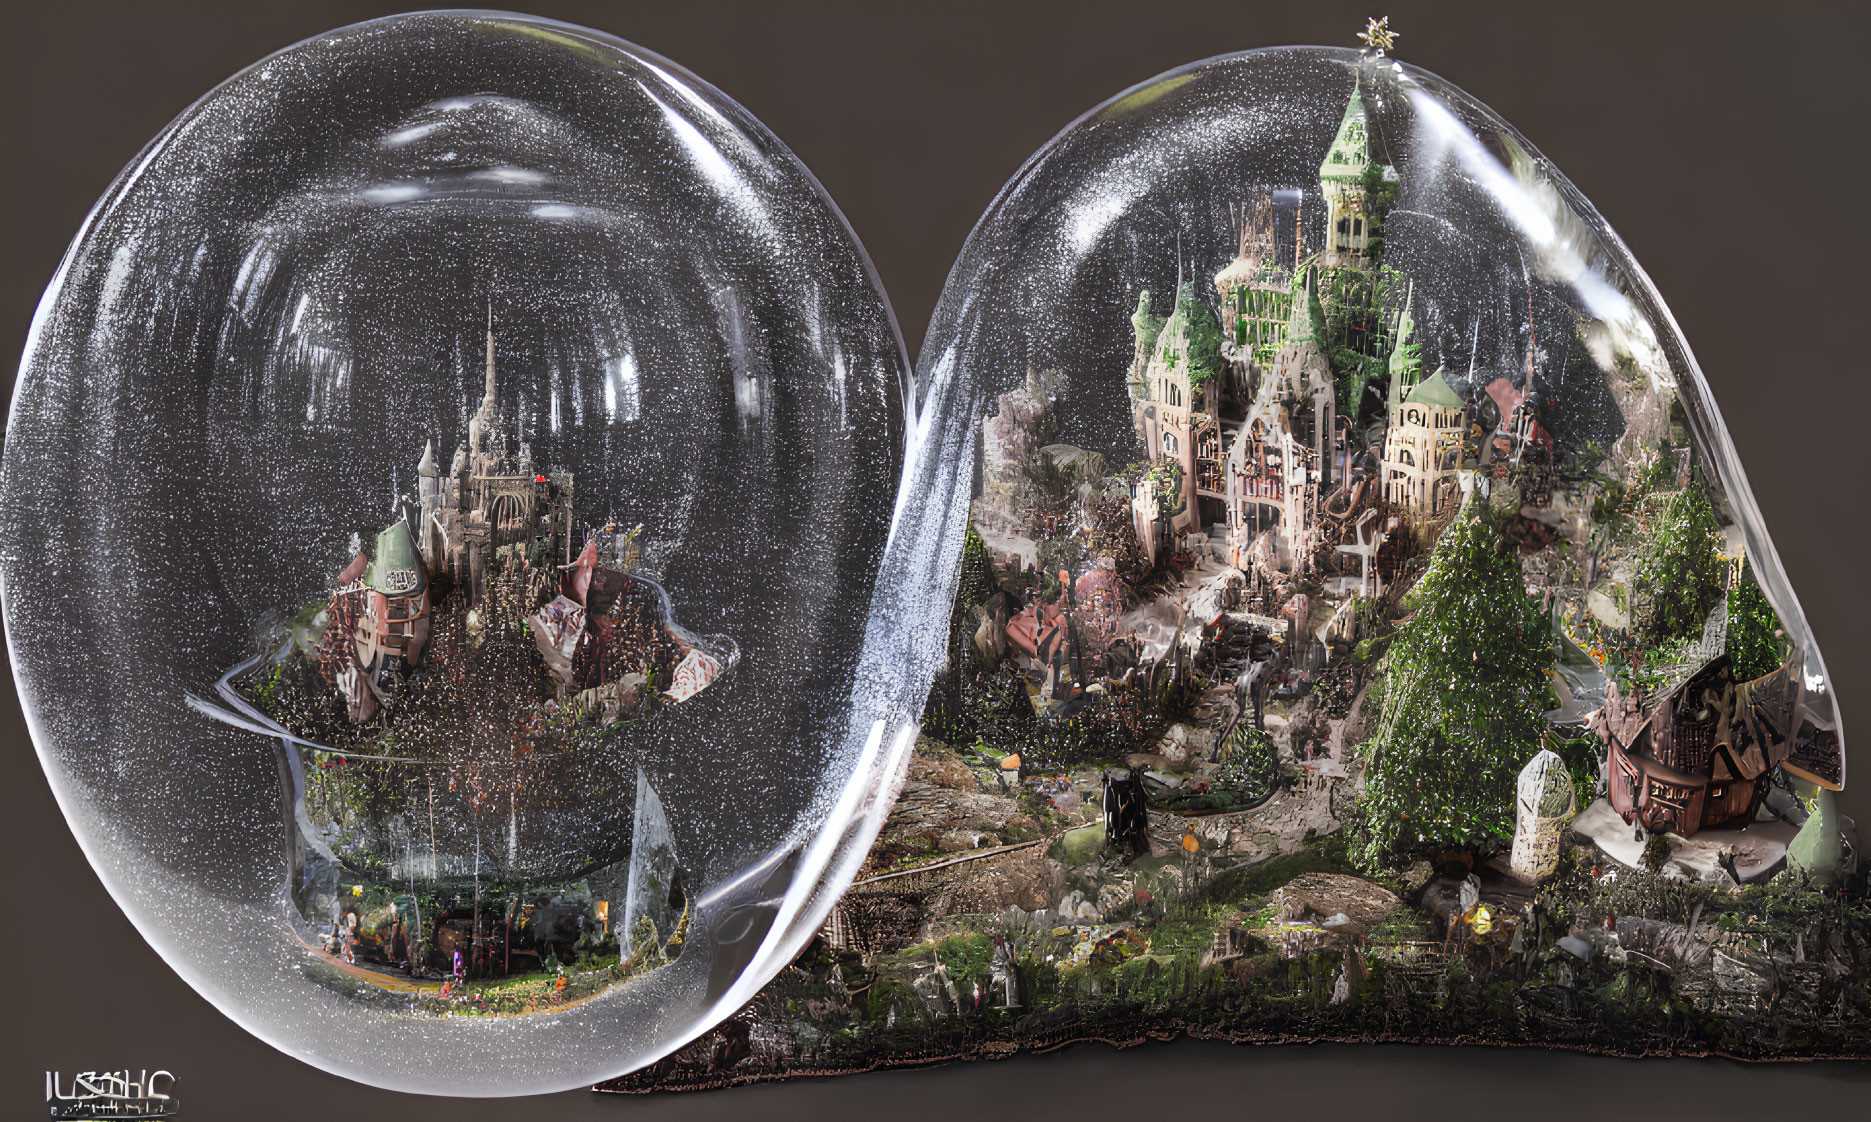 Detailed 3D Render of Interconnected Snow Globes with Fantasy Landscapes